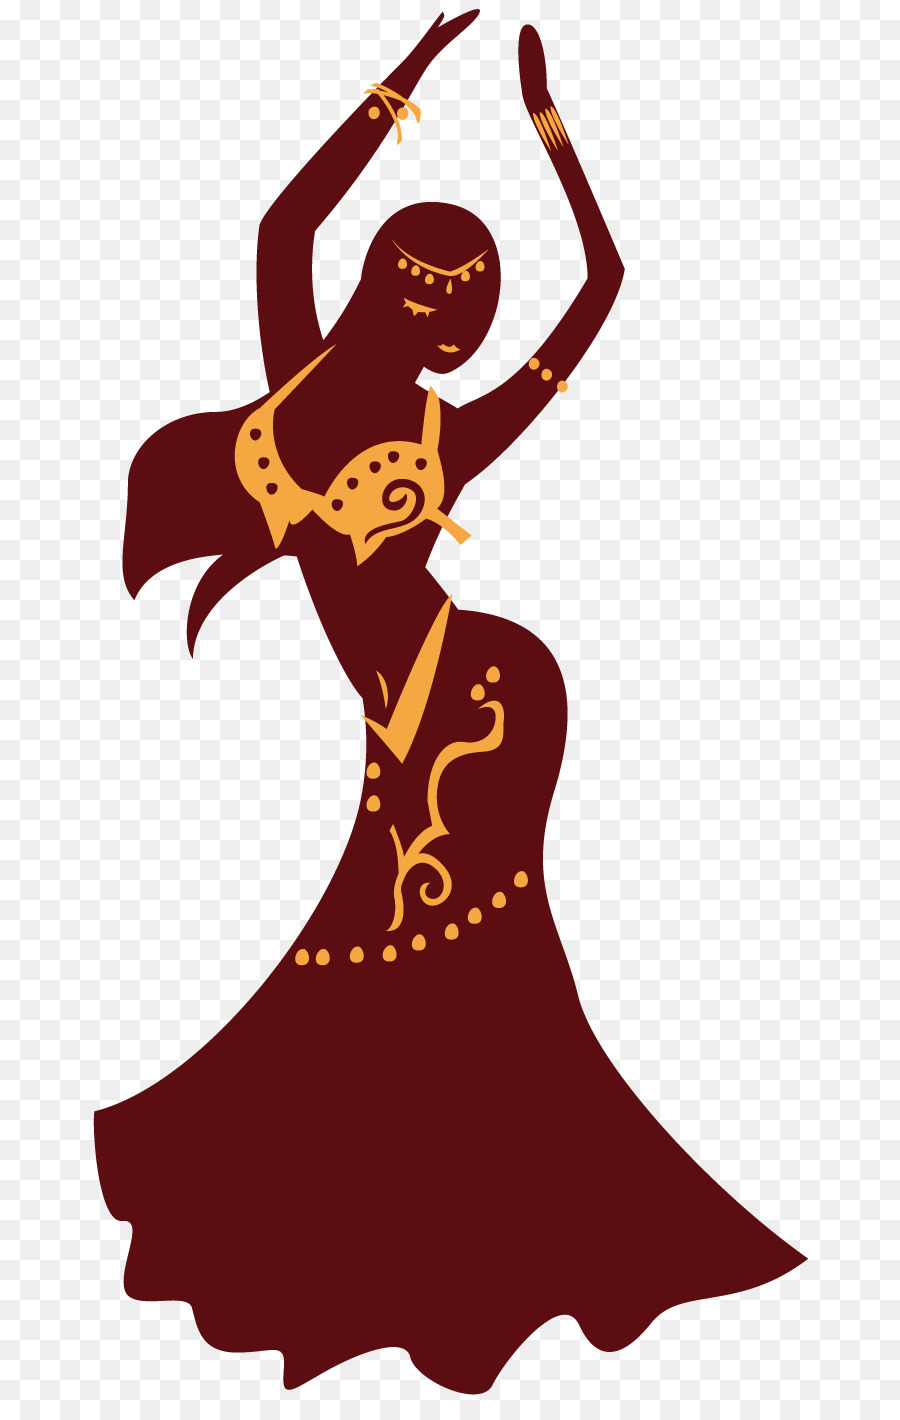 Art Character Female Silhouette Clip art - Silhouette png download - 716*1410 - Free Transparent Art png Download.